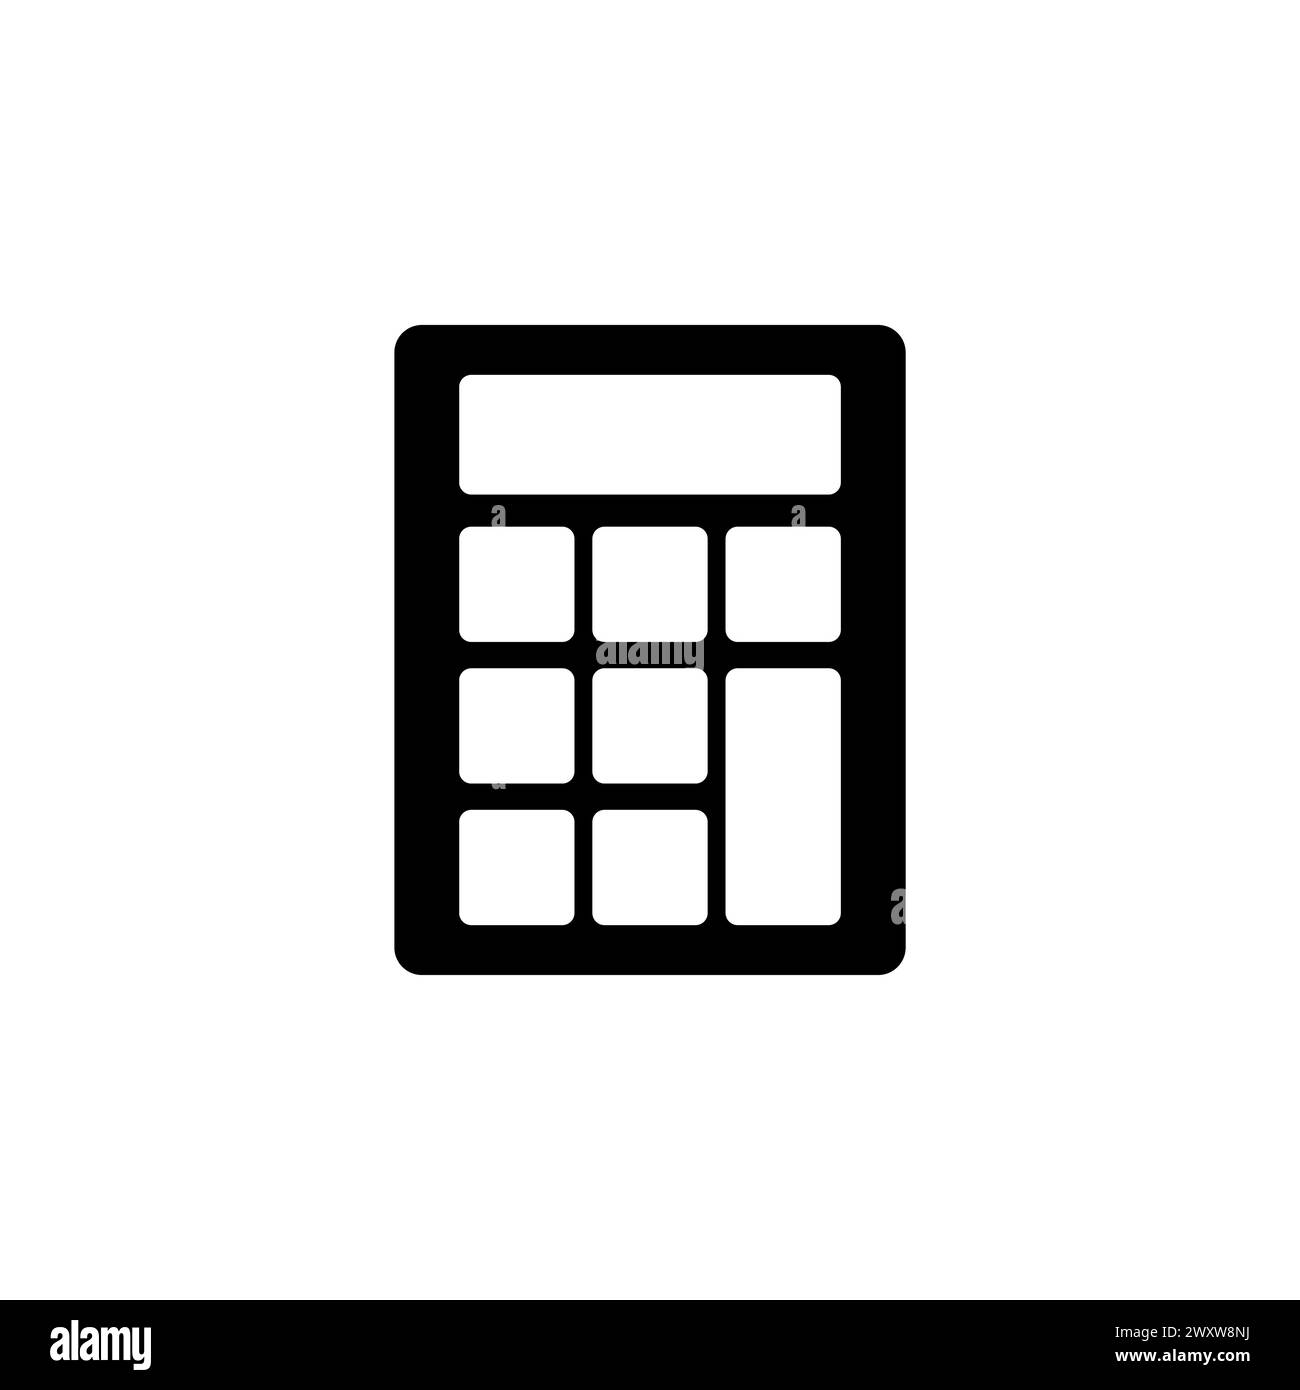 Calculator flat vector icon. Simple solid symbol isolated on white background Stock Vector